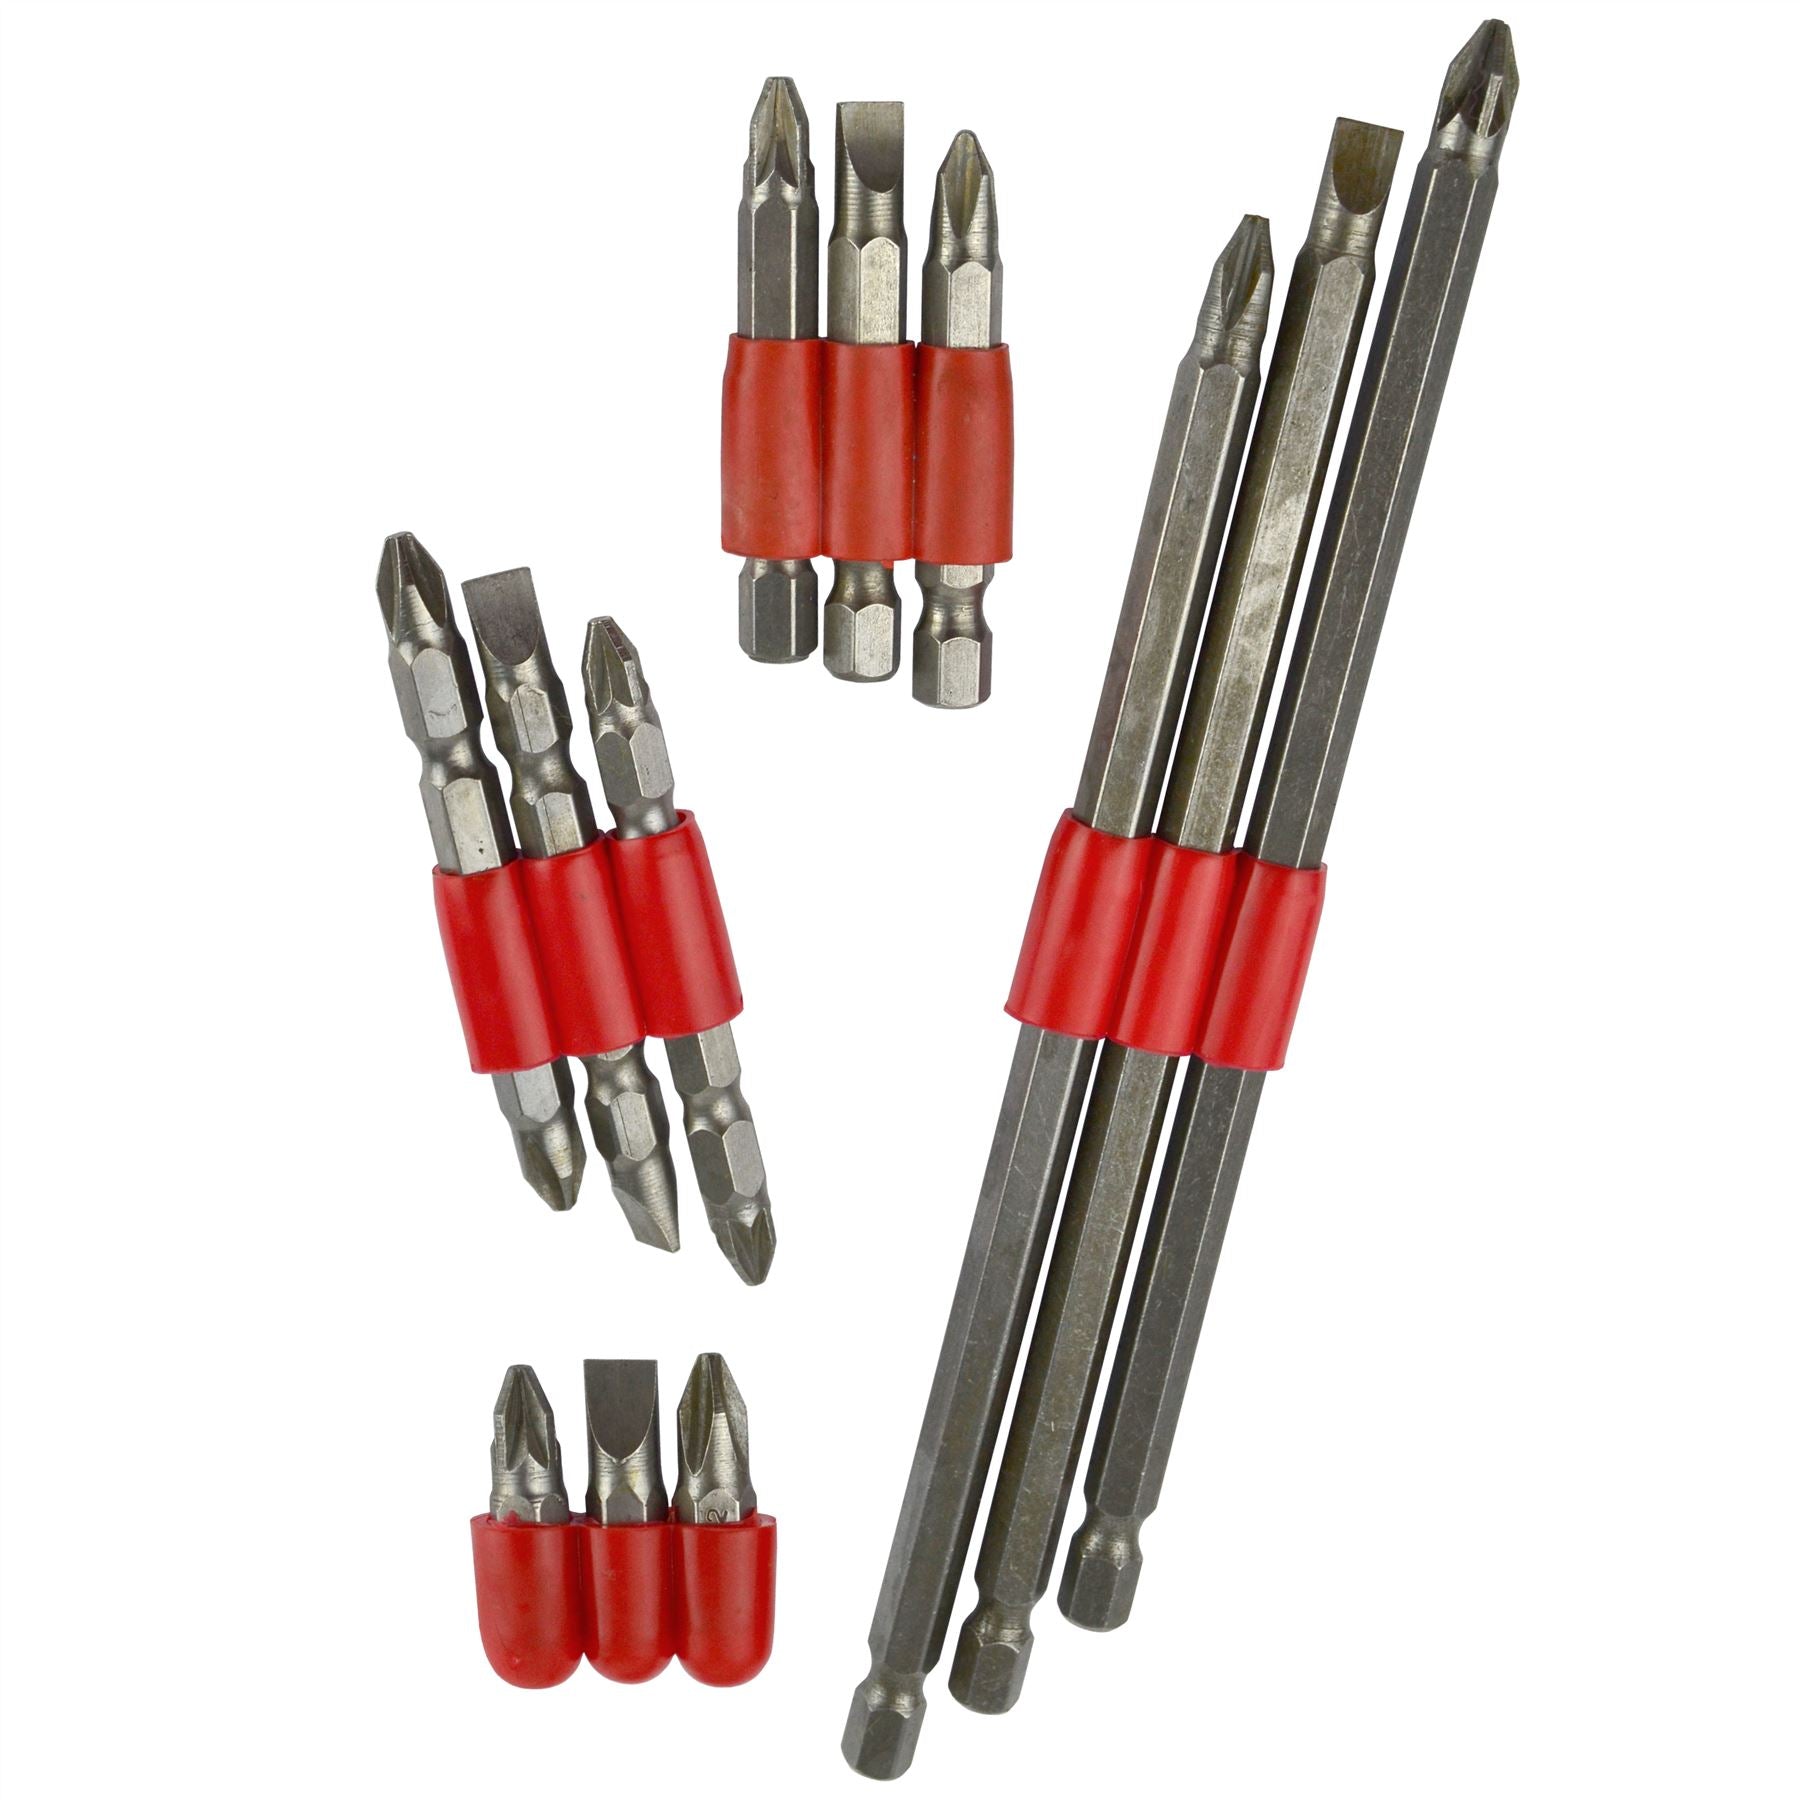 12pc Assorted Power Bit Set Philips, Pozi & Slotted Hex Screwdriver Drill TE685